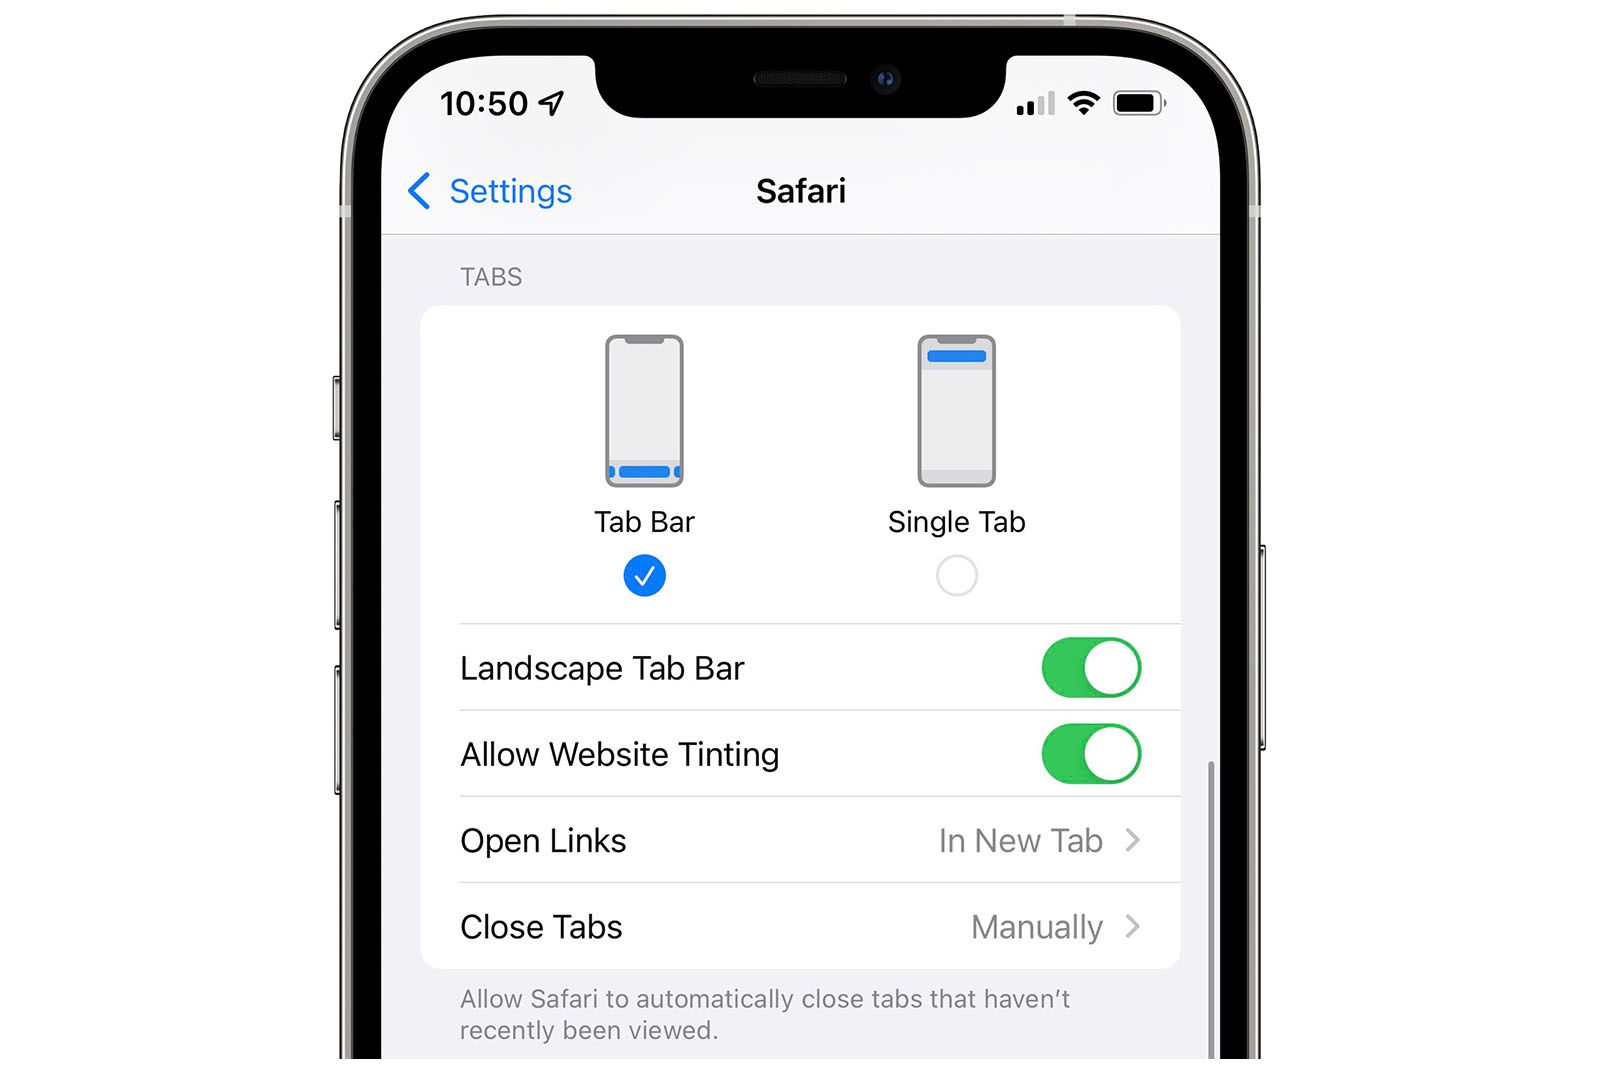 Apple backtracks on some iOS 15 Safari design changes, now offering multiple UI layouts in Settings photo 1